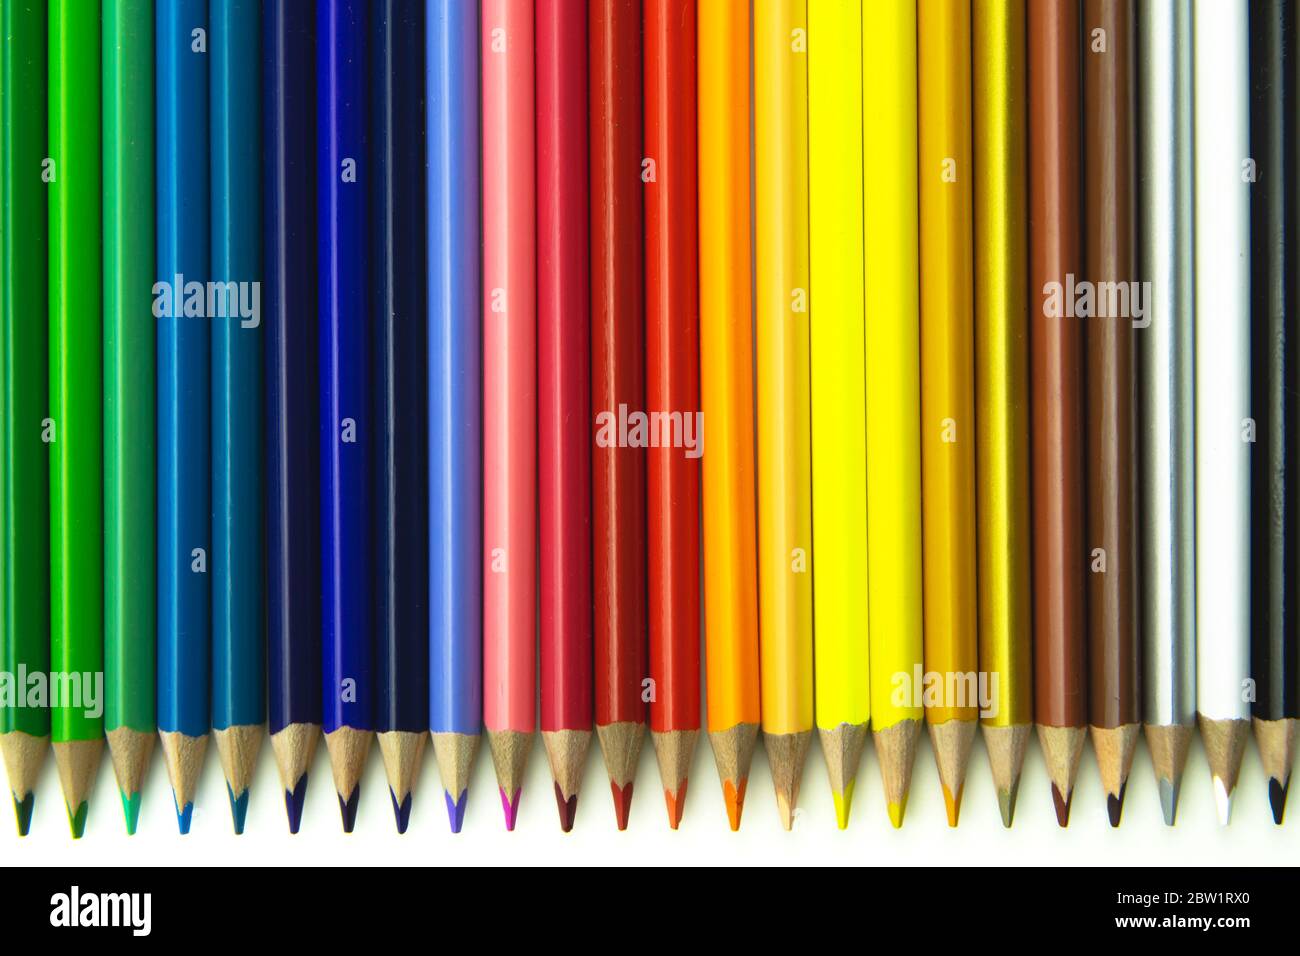 Crayons. Colorful pencils isolated on white background. Back to school concept. Stock Photo